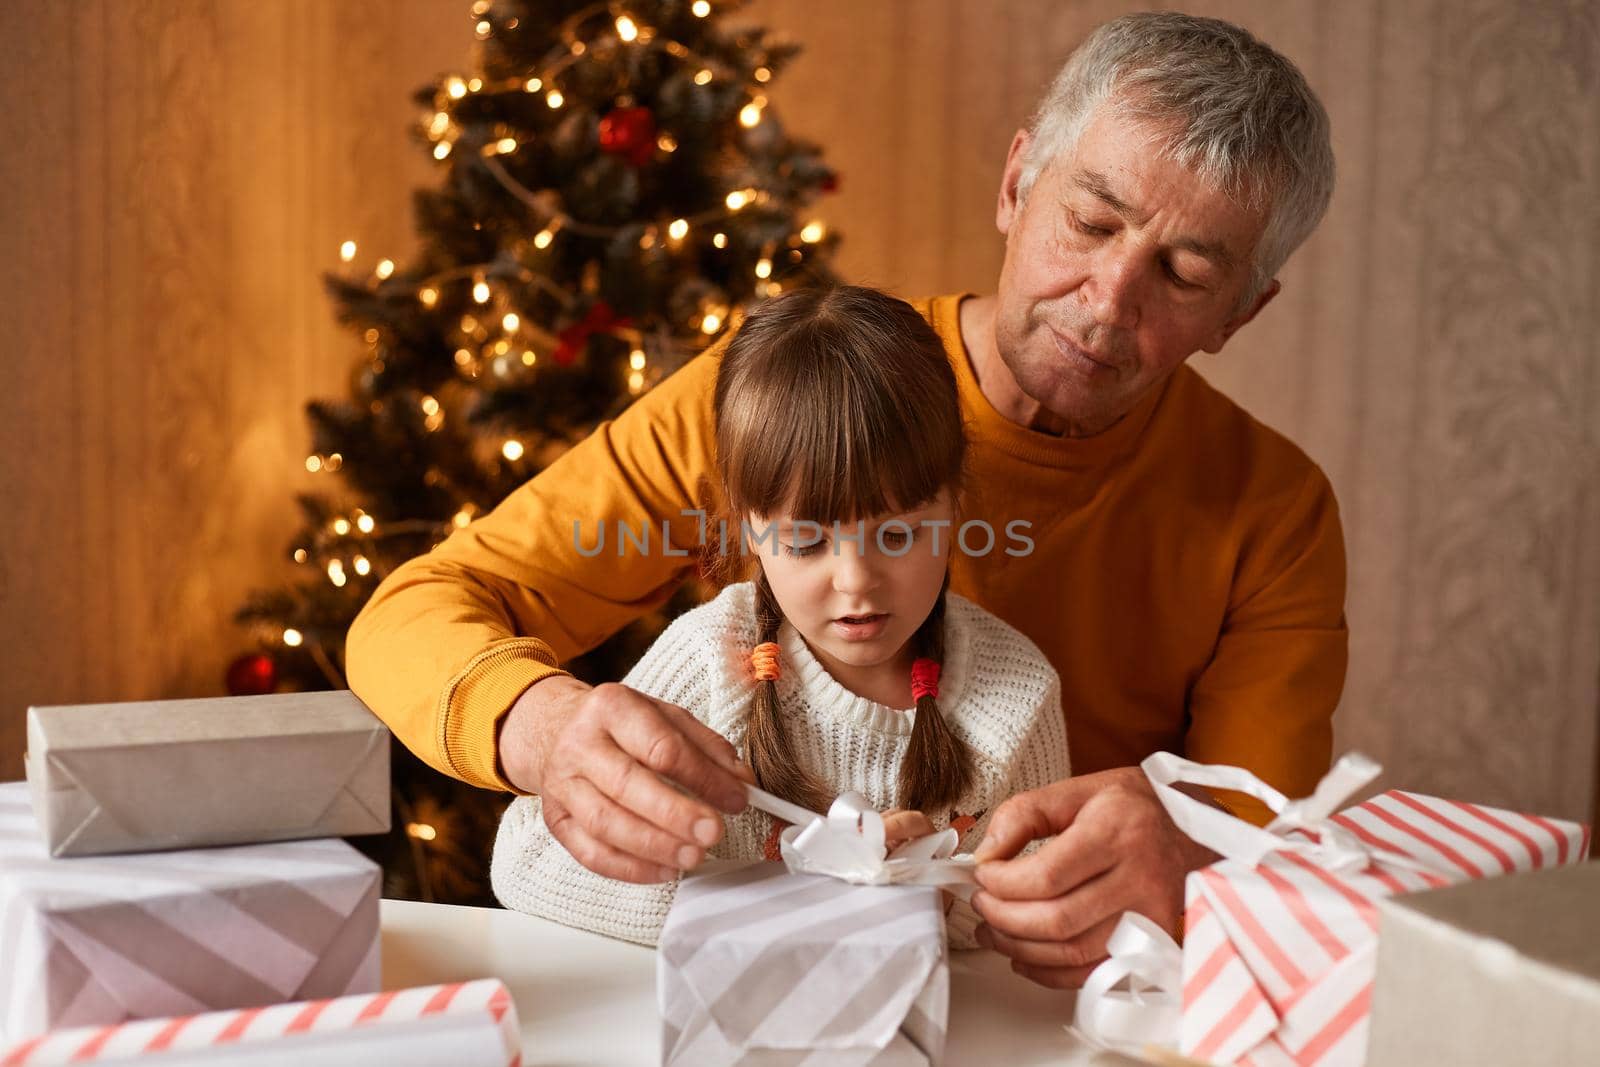 Concentrated little girl with pigtails wearing white sweater posing with her grandfather at table and preparing present boxes for congratulating their family with New year eve.